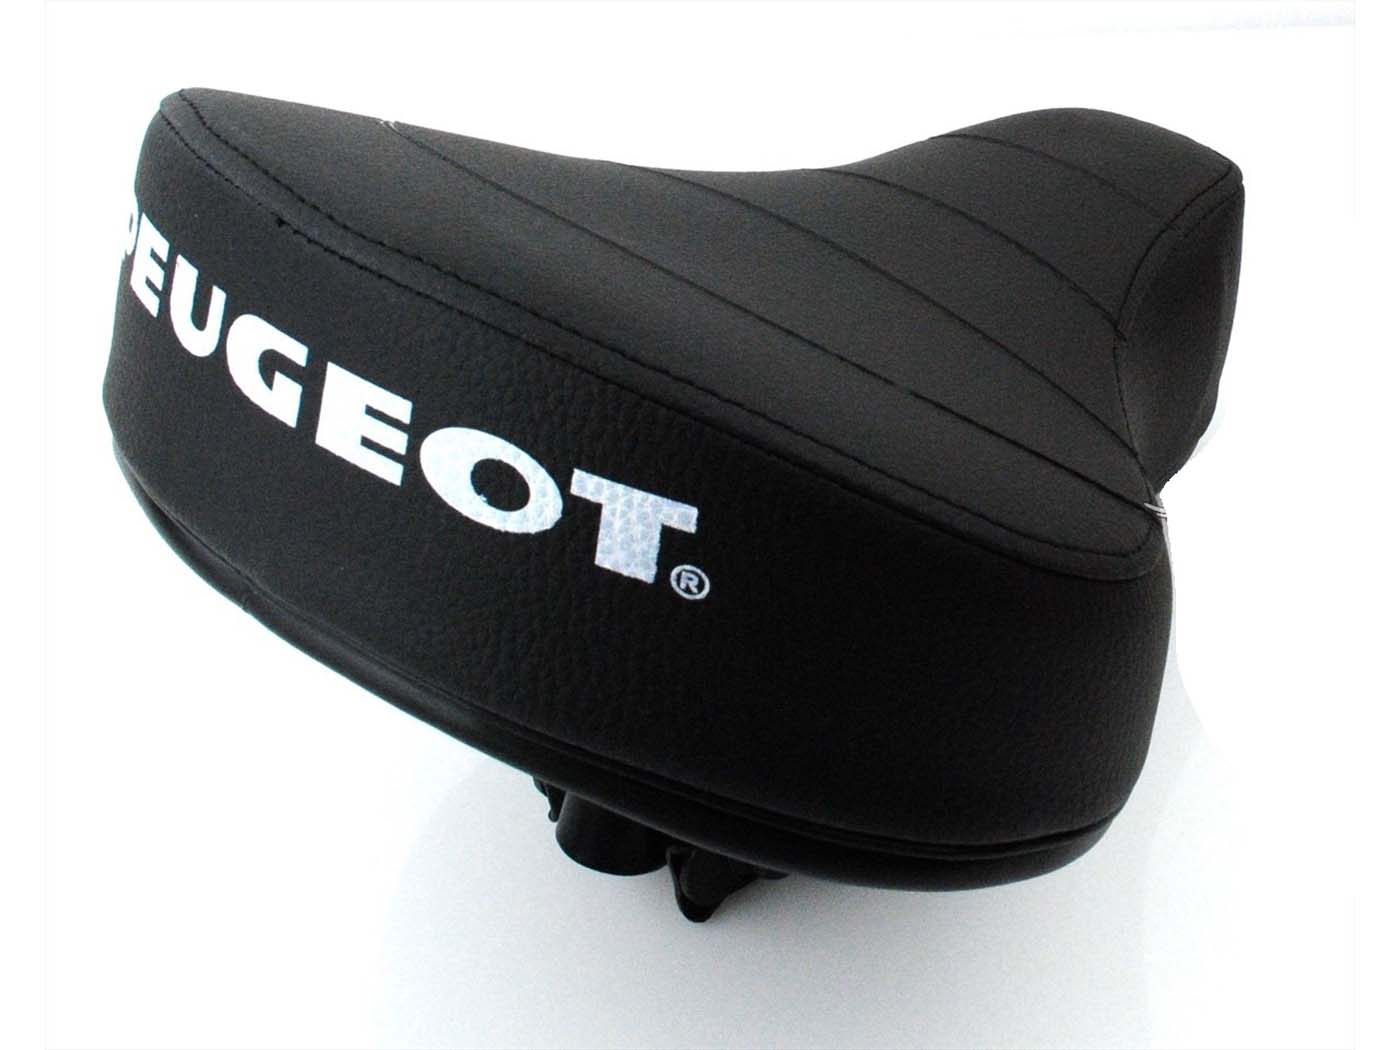 Standard Comfort Saddle With Lettering For Peugeot 103 Moped